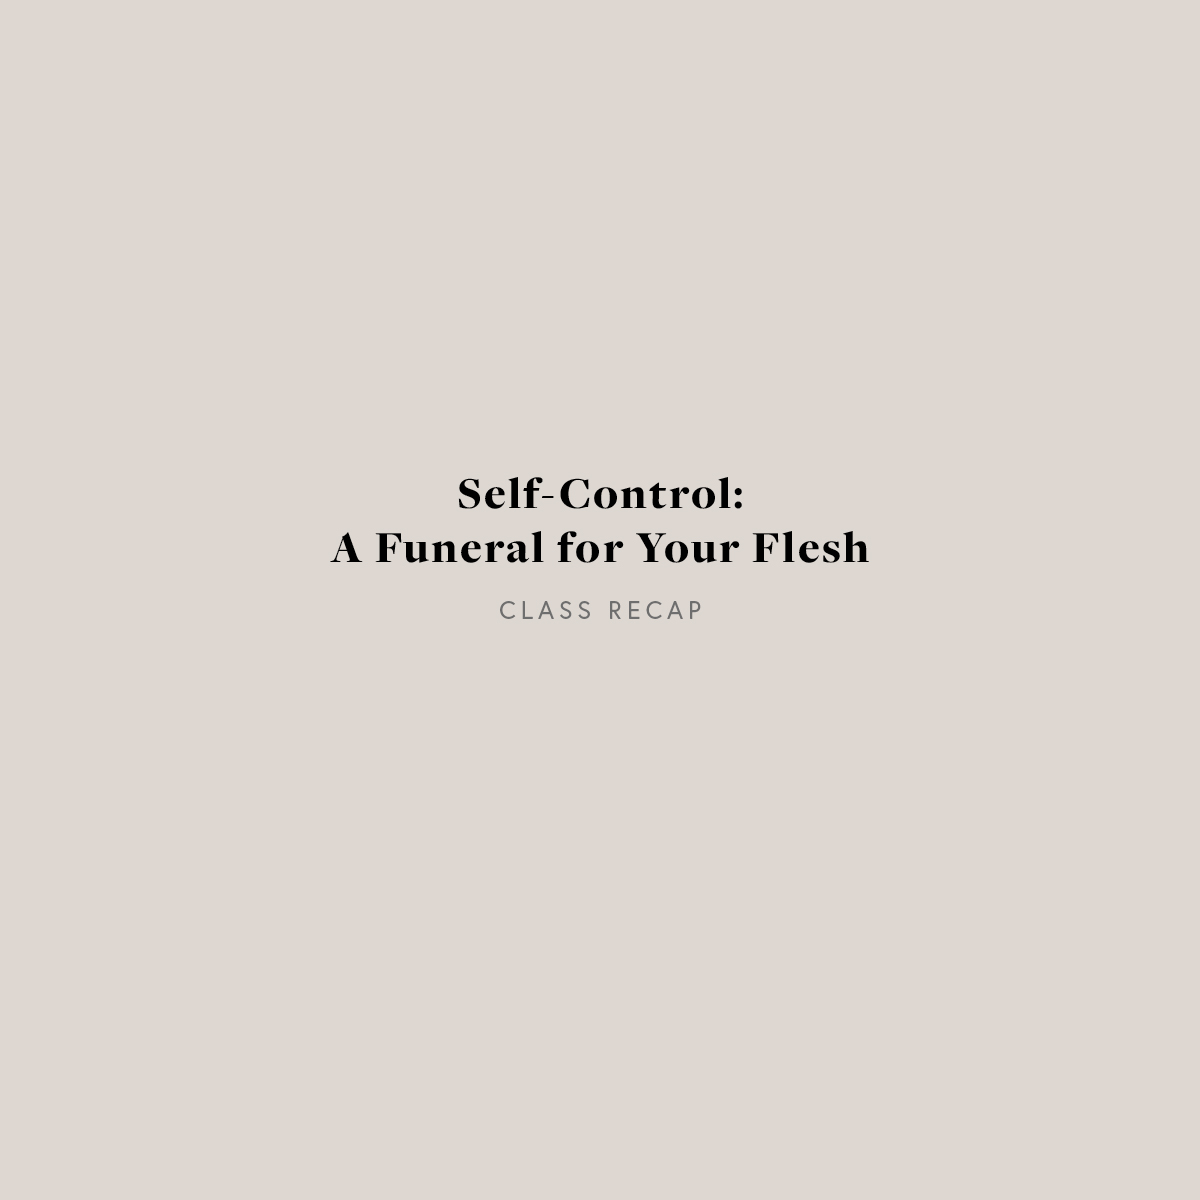 Self-Control: A Funeral for Your Flesh